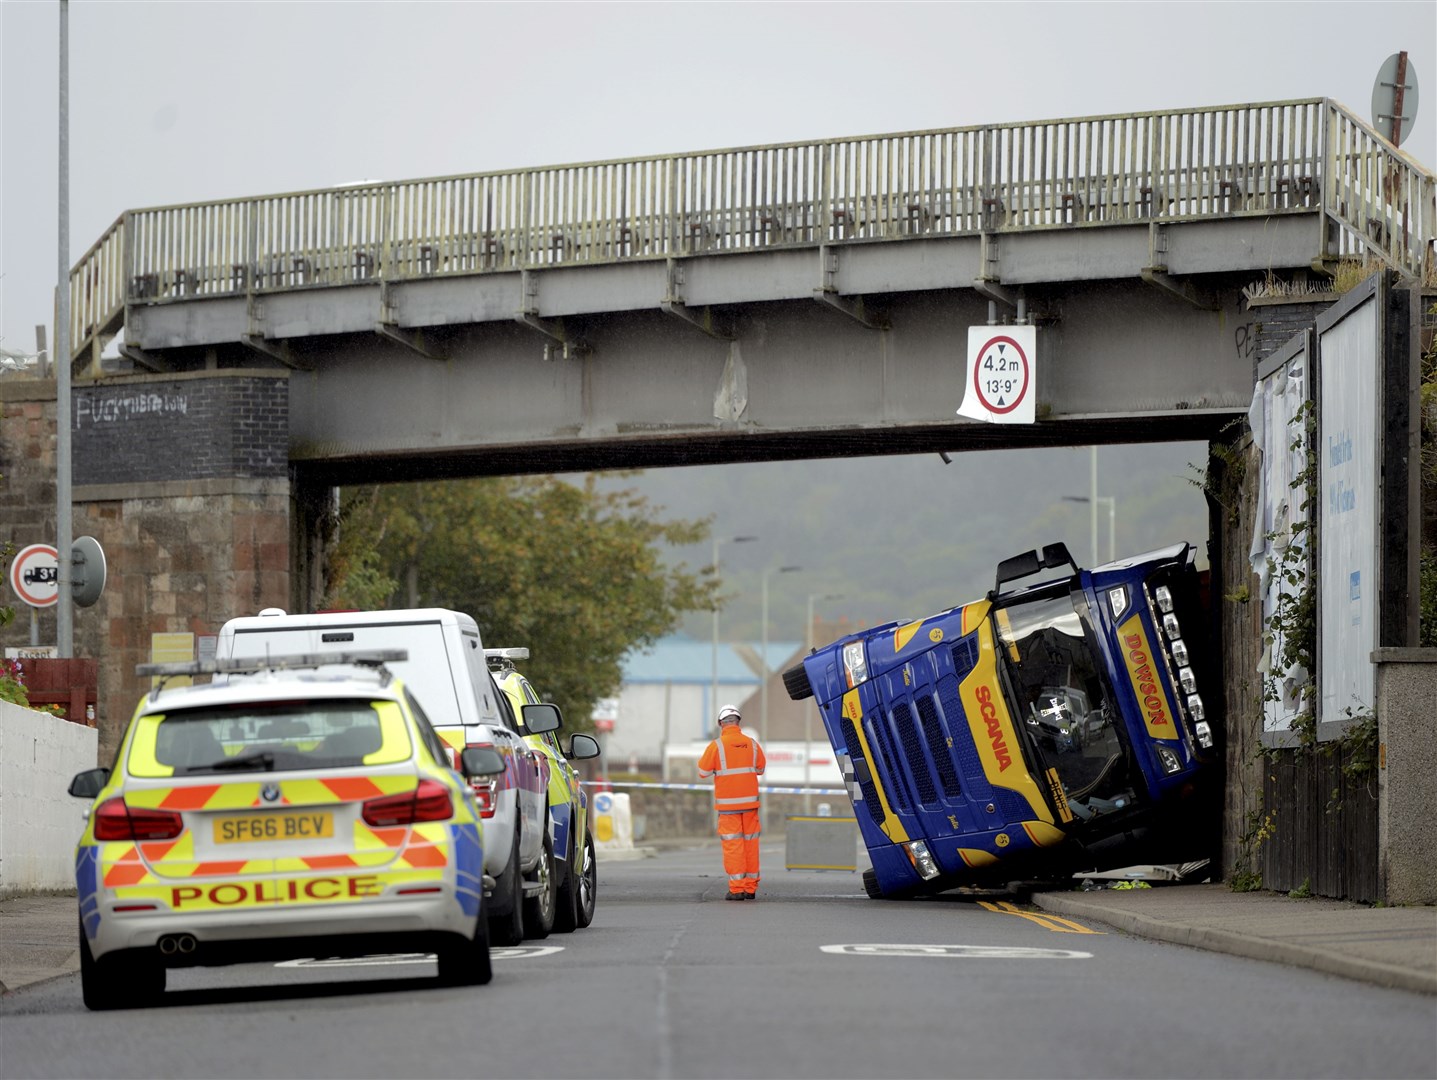 The road was closed for several hours after the lorry hit the rail bridge in Lower Kessock Street.